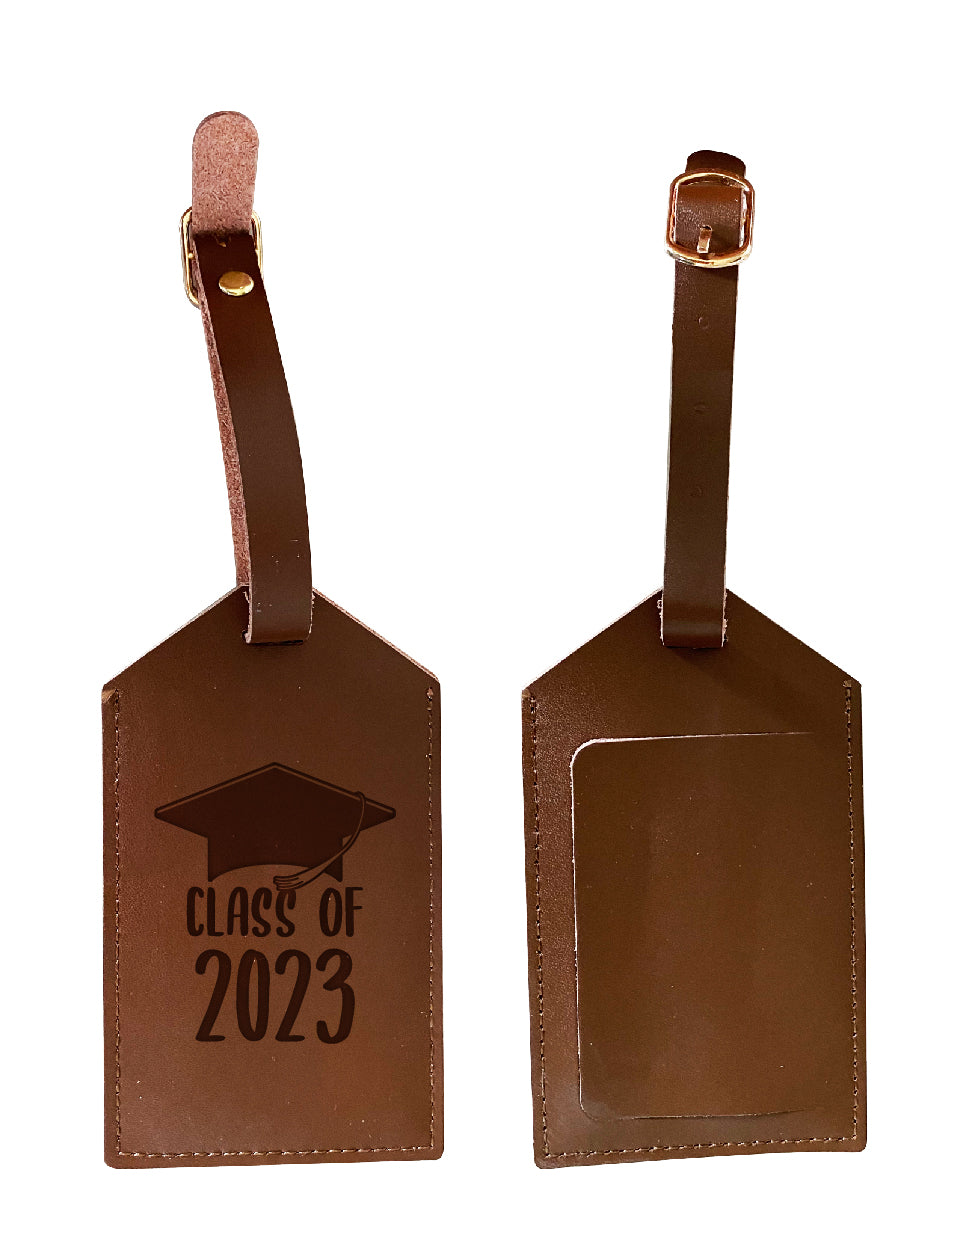 Class of 2023 Graduation Leather Luggage Tag Engraved